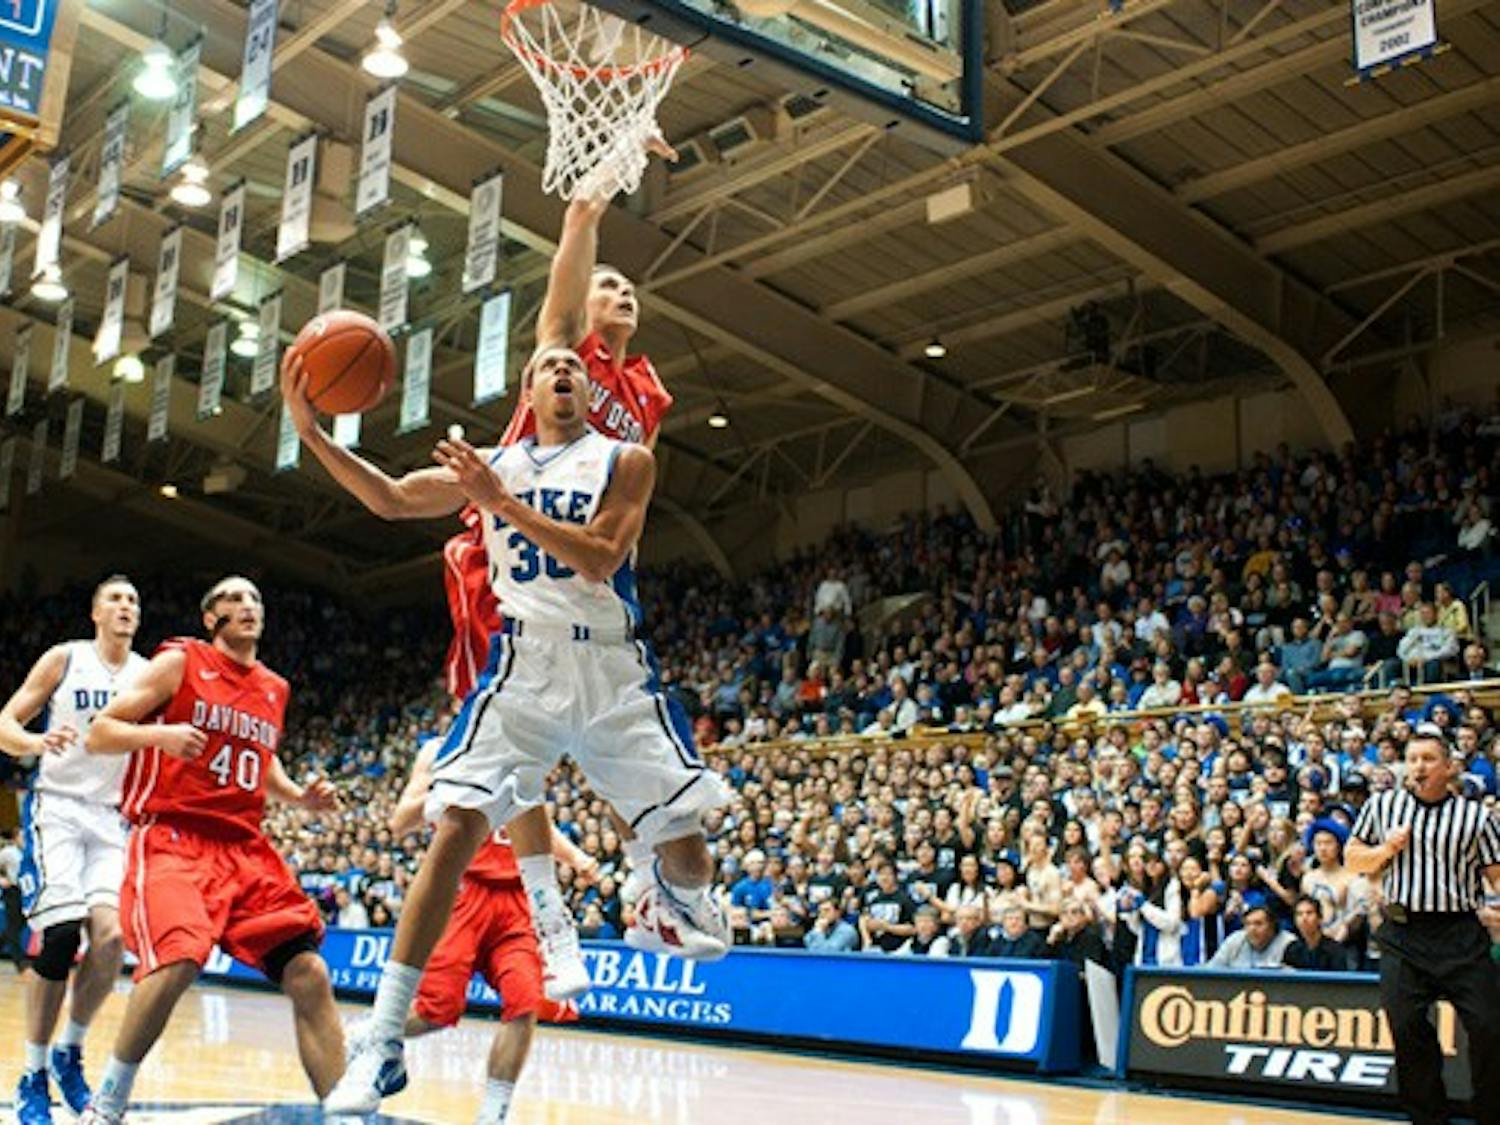 Seth Curry had nine of his 17 points in the first half, in which the Blue Devils shot 56.5 percent from the floor.